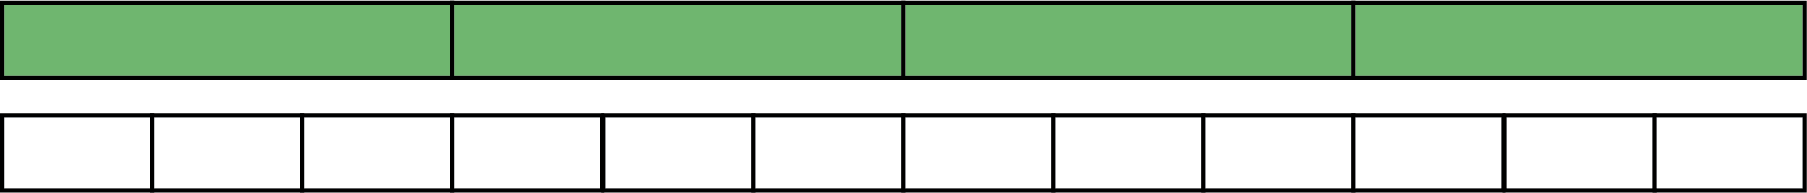 A pair of tape diagrams for one quantity. The top tape diagram has 4 equal parts and the bottom tape diagram has 12 equal parts.